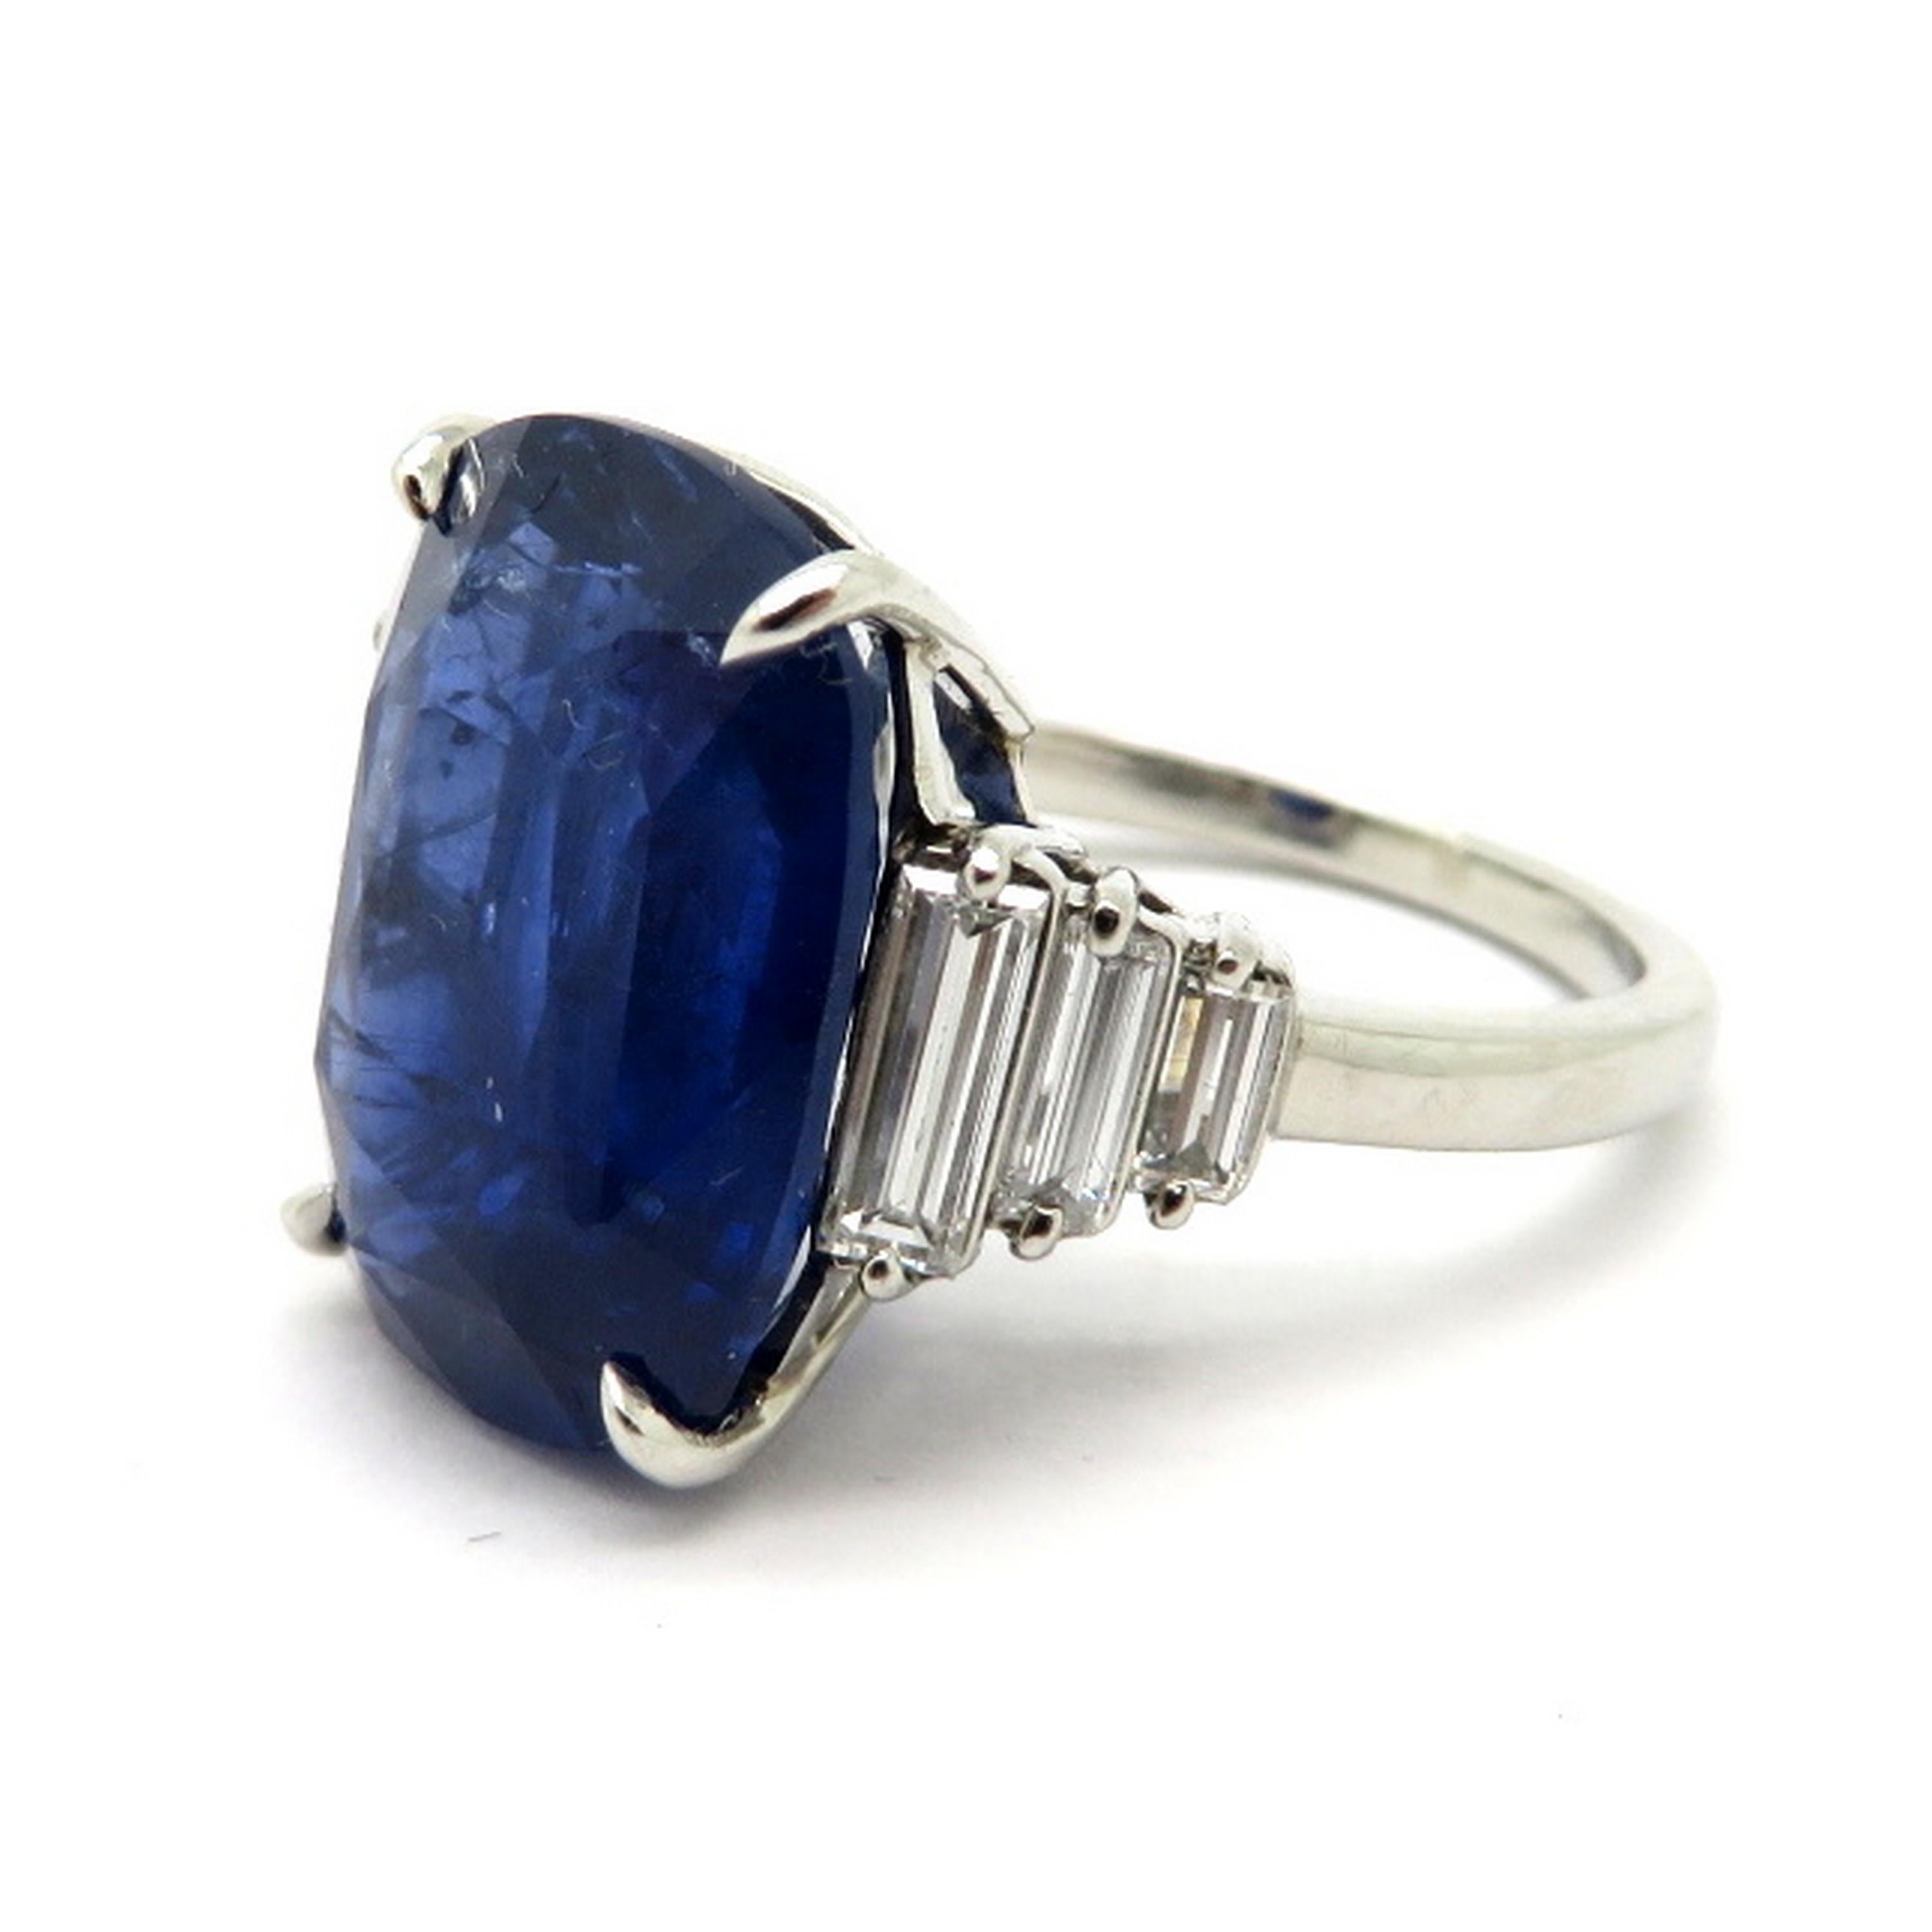 Platinum estate 12.92 carat cushion sapphire and baguette diamond fashion ring. Showcasing one fine quality cushion cut blue Sapphire weighing approximately 12.92 carats. Accented with six baguette shaped diamonds with various measurements weighing